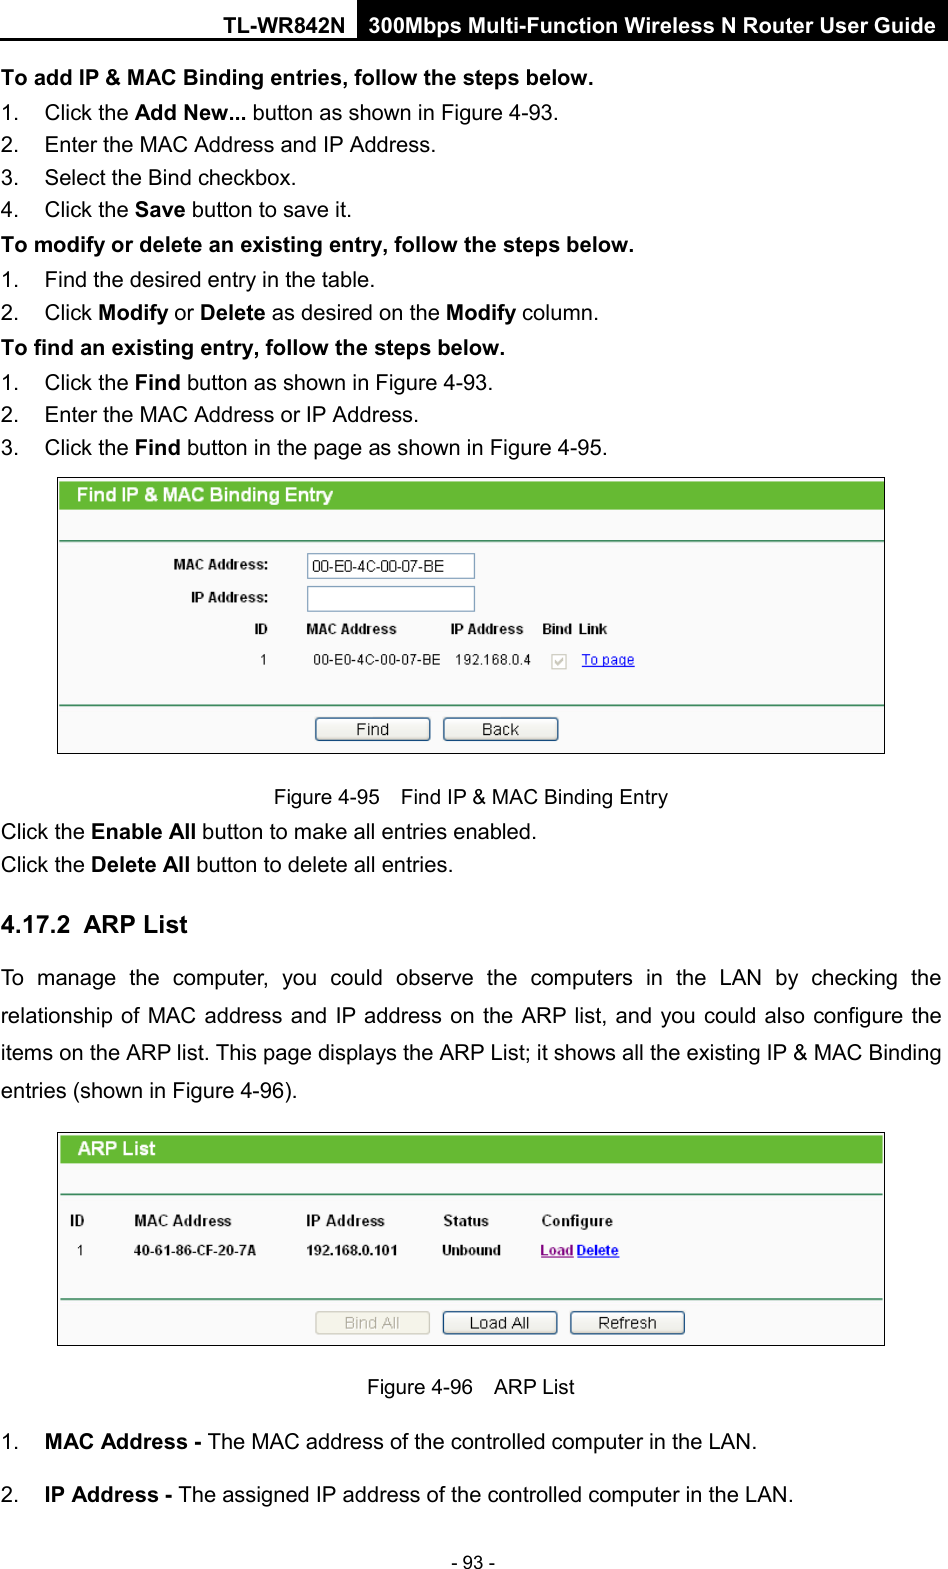 TL-WR842N 300Mbps Multi-Function Wireless N Router User Guide  - 93 - To add IP &amp; MAC Binding entries, follow the steps below. 1. Click the Add New... button as shown in Figure 4-93.   2. Enter the MAC Address and IP Address. 3. Select the Bind checkbox.   4. Click the Save button to save it. To modify or delete an existing entry, follow the steps below. 1. Find the desired entry in the table.   2. Click Modify or Delete as desired on the Modify column.   To find an existing entry, follow the steps below. 1. Click the Find button as shown in Figure 4-93. 2. Enter the MAC Address or IP Address. 3. Click the Find button in the page as shown in Figure 4-95.  Figure 4-95  Find IP &amp; MAC Binding Entry Click the Enable All button to make all entries enabled. Click the Delete All button to delete all entries. 4.17.2 ARP List To manage the computer, you could observe the computers in the LAN by checking the relationship of MAC address and IP address on the ARP list, and you could also configure the items on the ARP list. This page displays the ARP List; it shows all the existing IP &amp; MAC Binding entries (shown in Figure 4-96).    Figure 4-96  ARP List 1. MAC Address - The MAC address of the controlled computer in the LAN.   2. IP Address - The assigned IP address of the controlled computer in the LAN.   